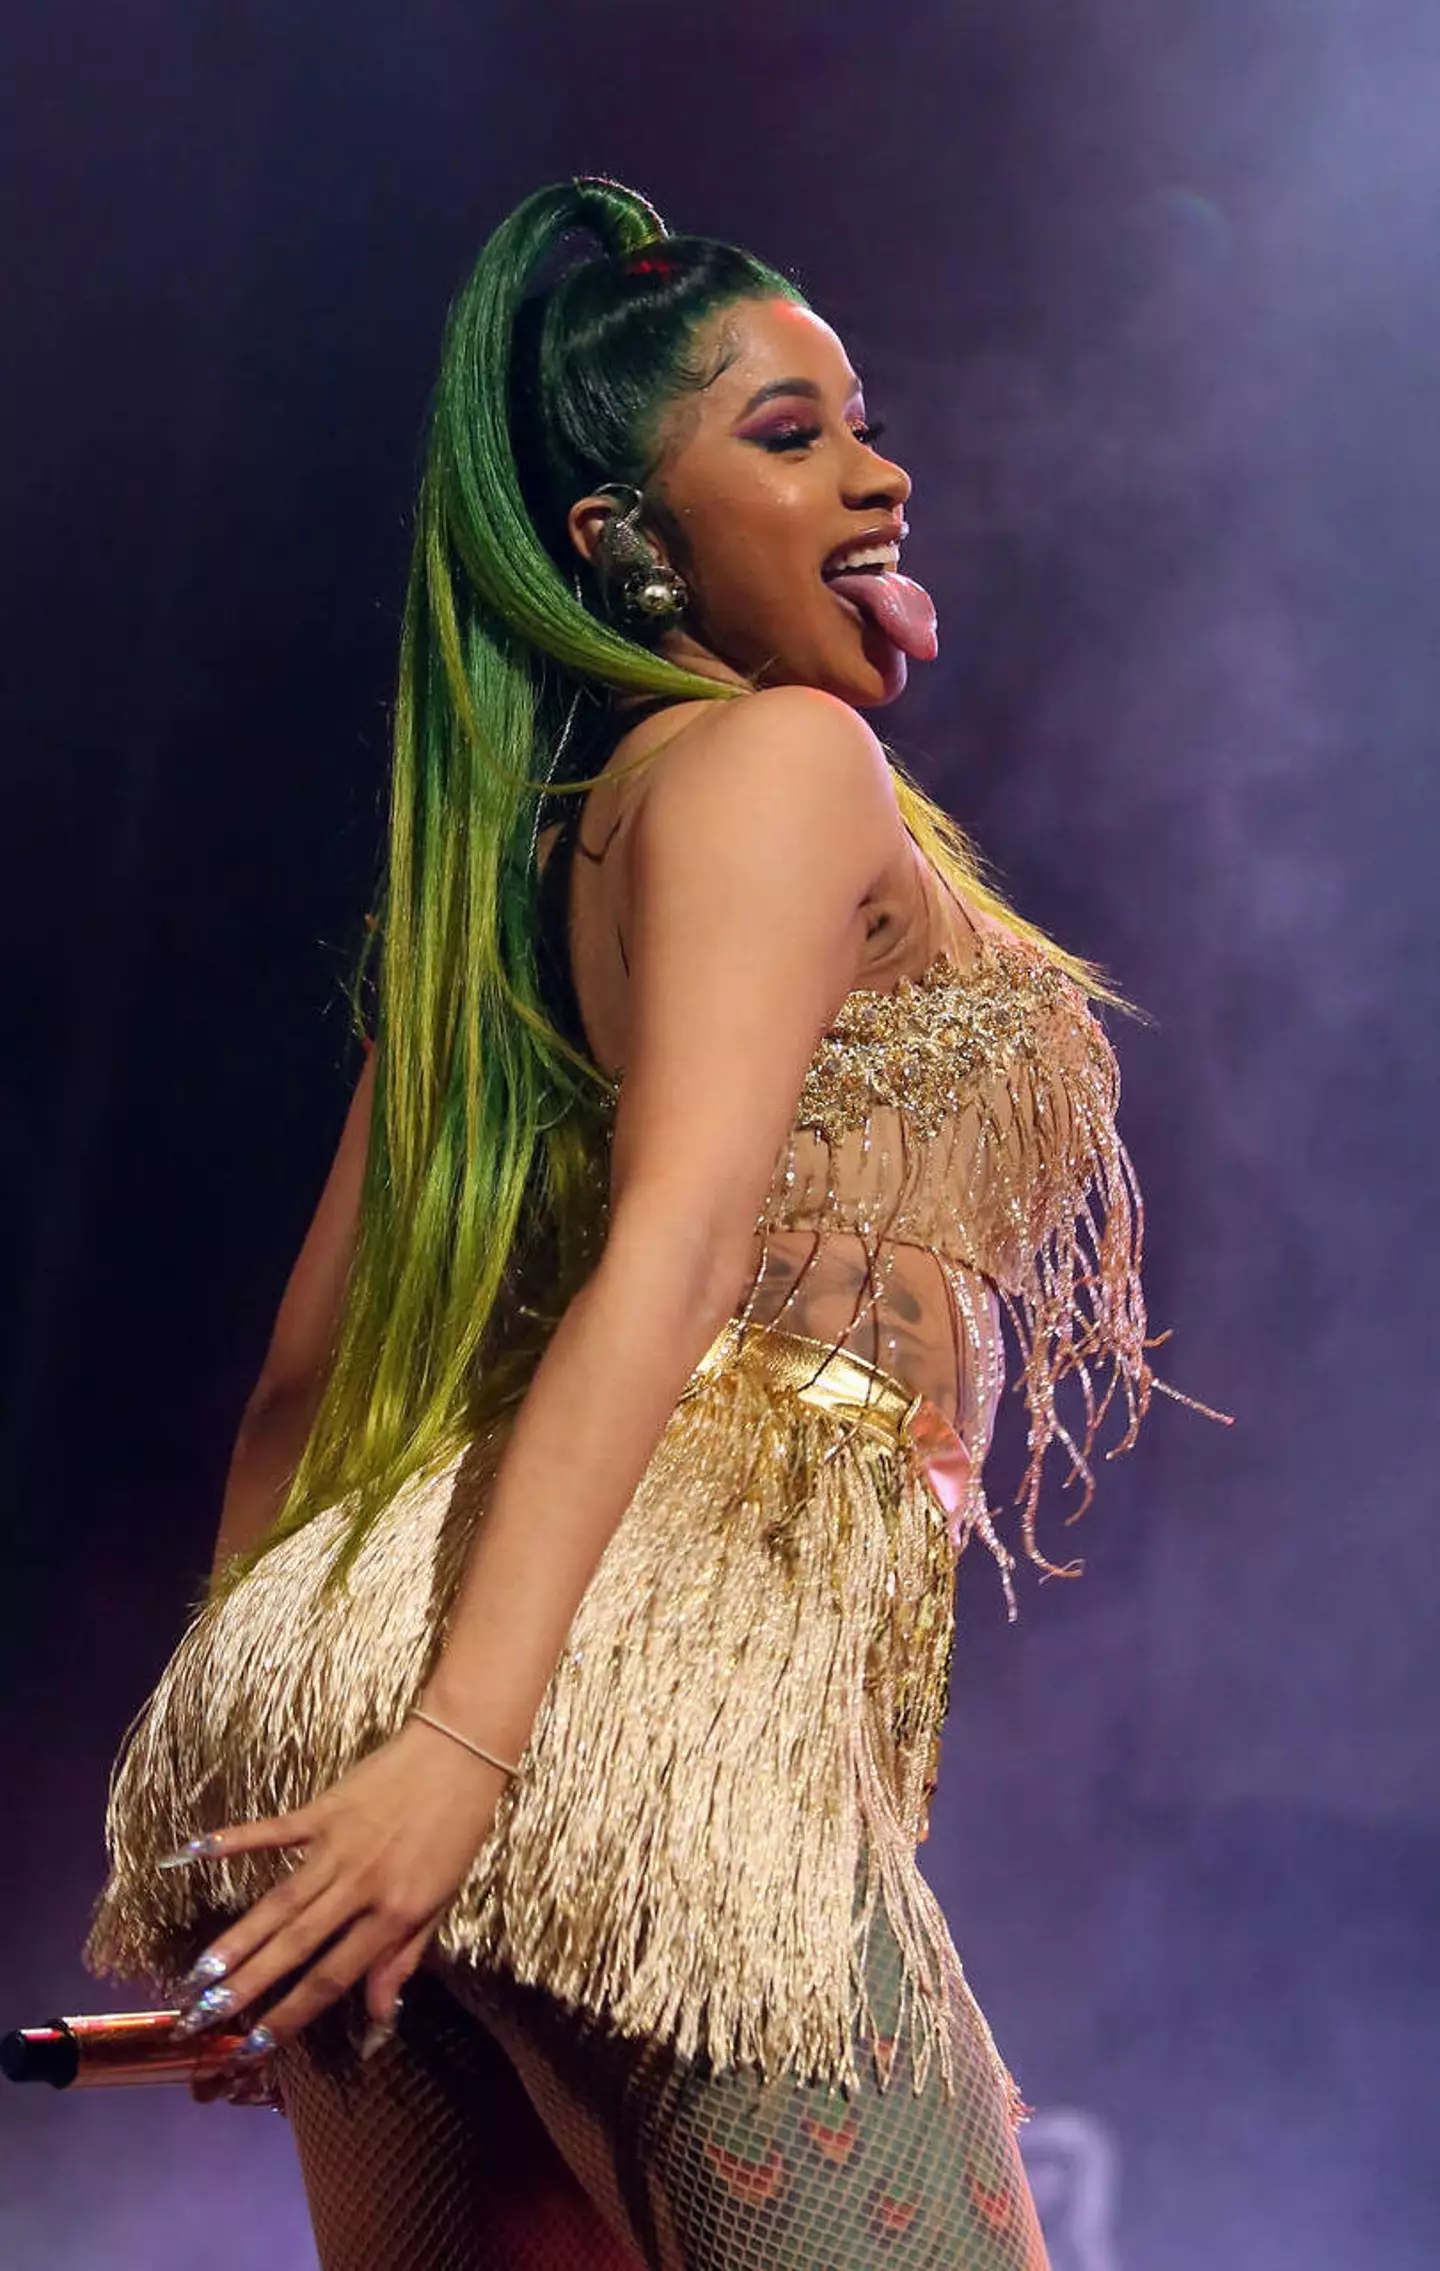 Cardi was the first female rapper to reach the achievement.